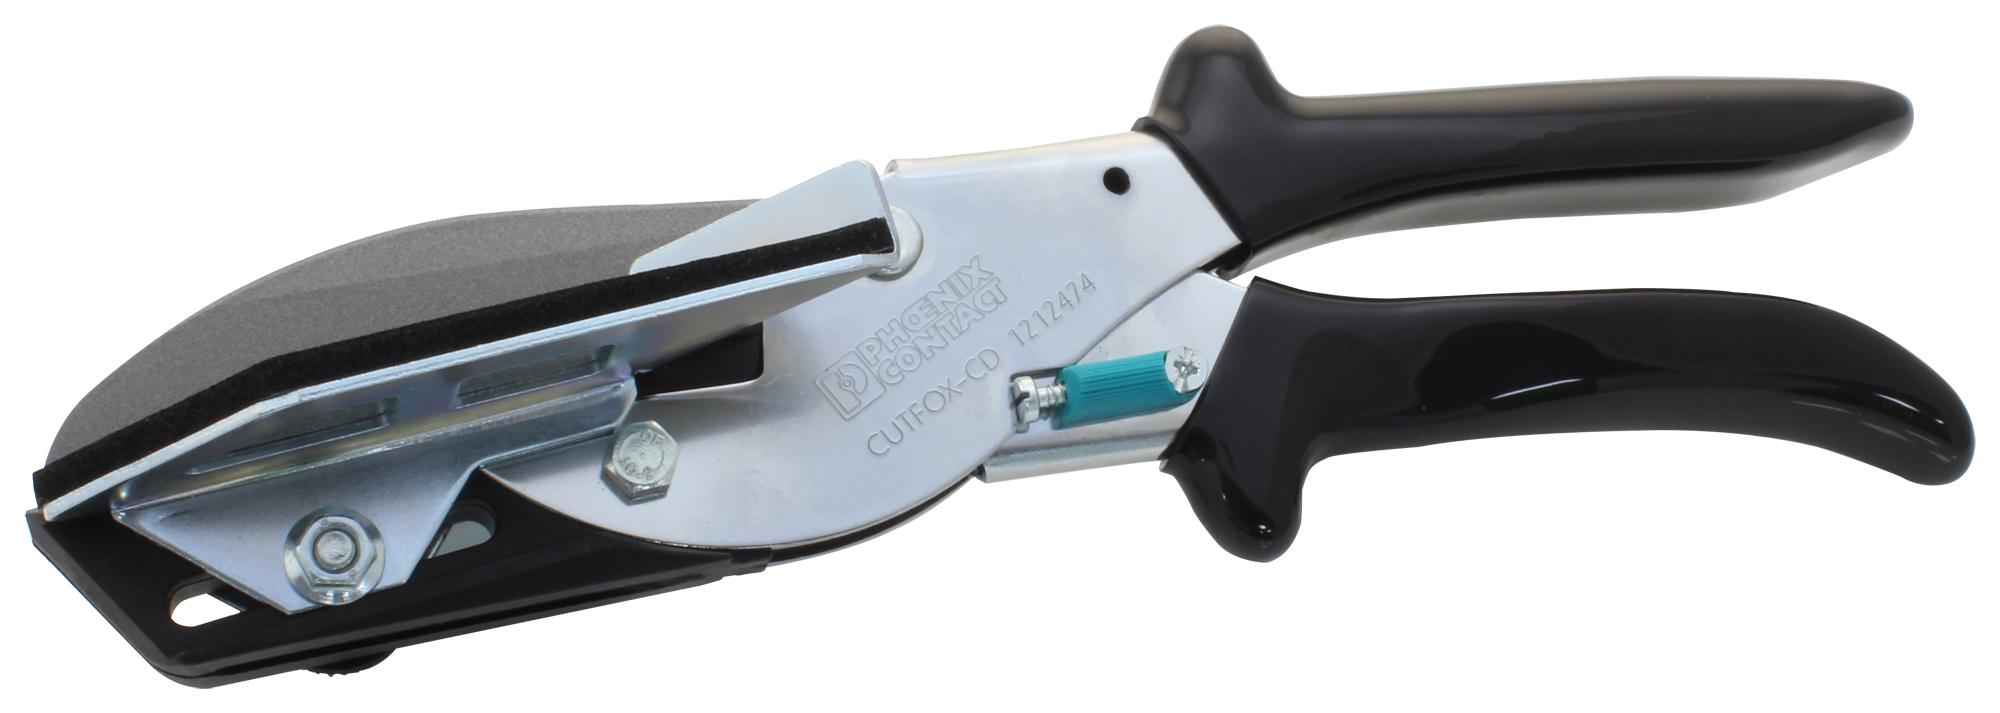 1212474 CABLE DUCT CUTTER, BLACK PHOENIX CONTACT